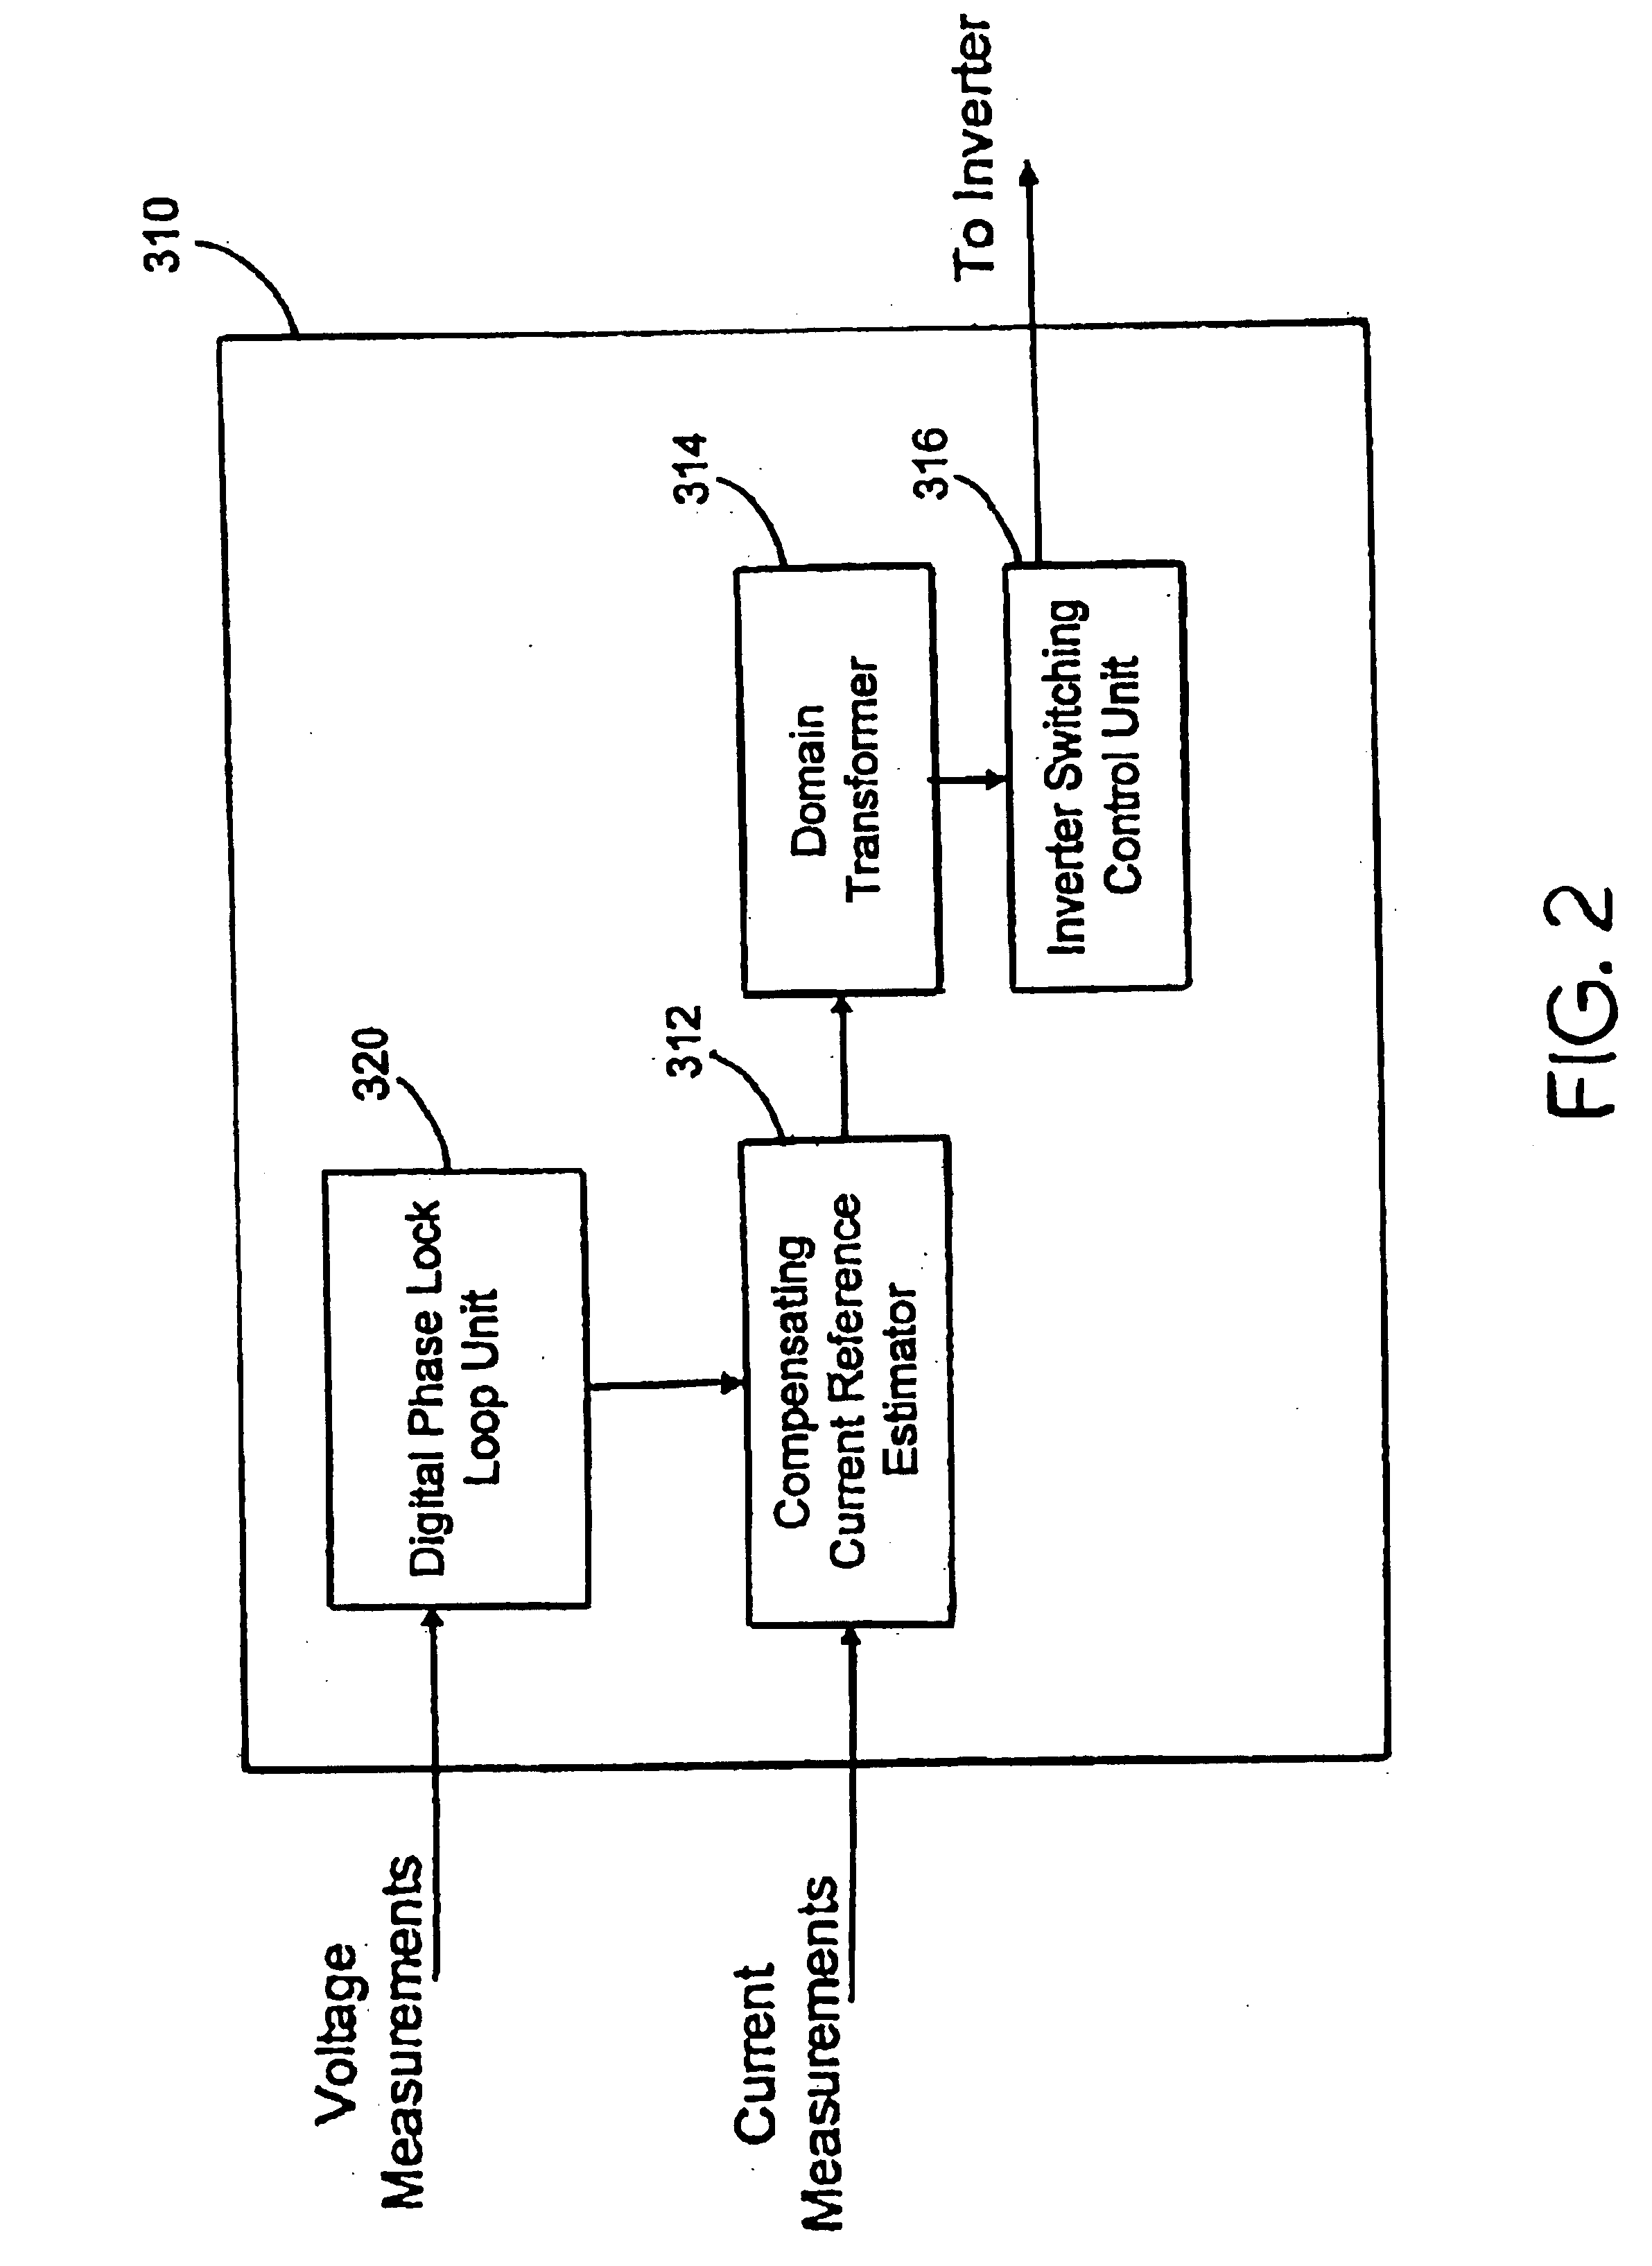 Active filter for multi-phase AC power system